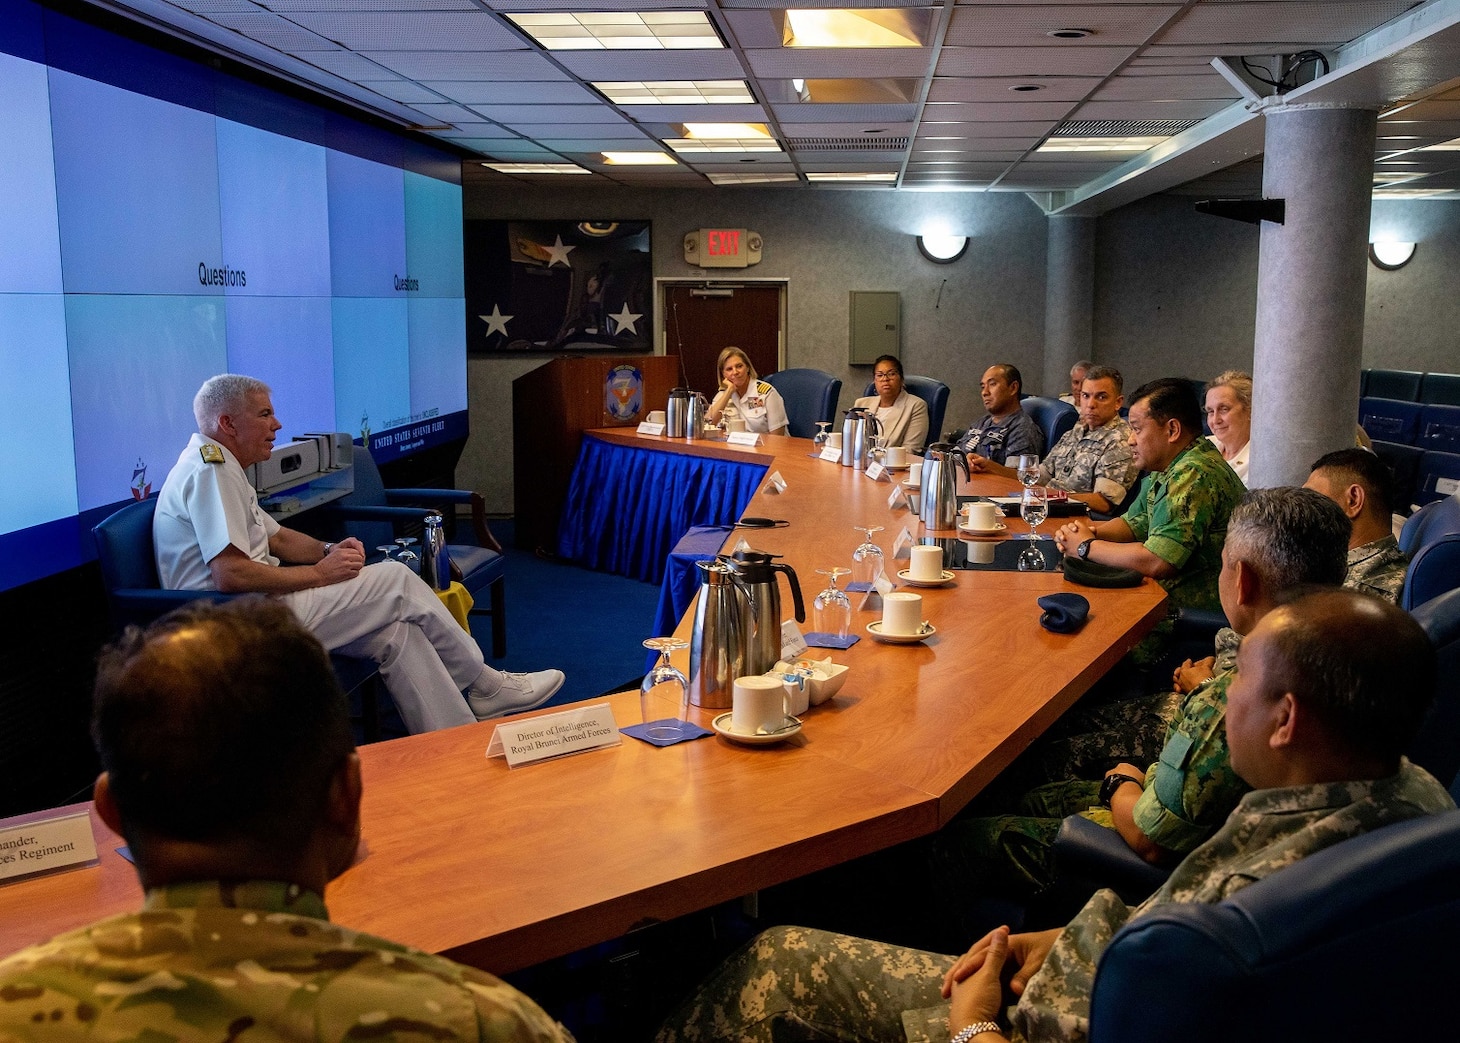 MUARA, Brunei (Aug. 3, 2023) - Commander, U.S. 7th Fleet Vice Adm. Karl Thomas, meets with leaders from the Royal Brunei Armed Forces during key leader engagements aboard U.S. 7th Fleet’s flagship USS Blue Ridge (LCC 19), Aug. 3. The port visit reflects the United States' commitment to the Indo-Pacific region and complements the many bilateral military cooperation activities conducted by the U.S. Navy and Brunei. U.S. Navy photo by Mass Communication Specialist 2nd Class Ryan M. Breeden)